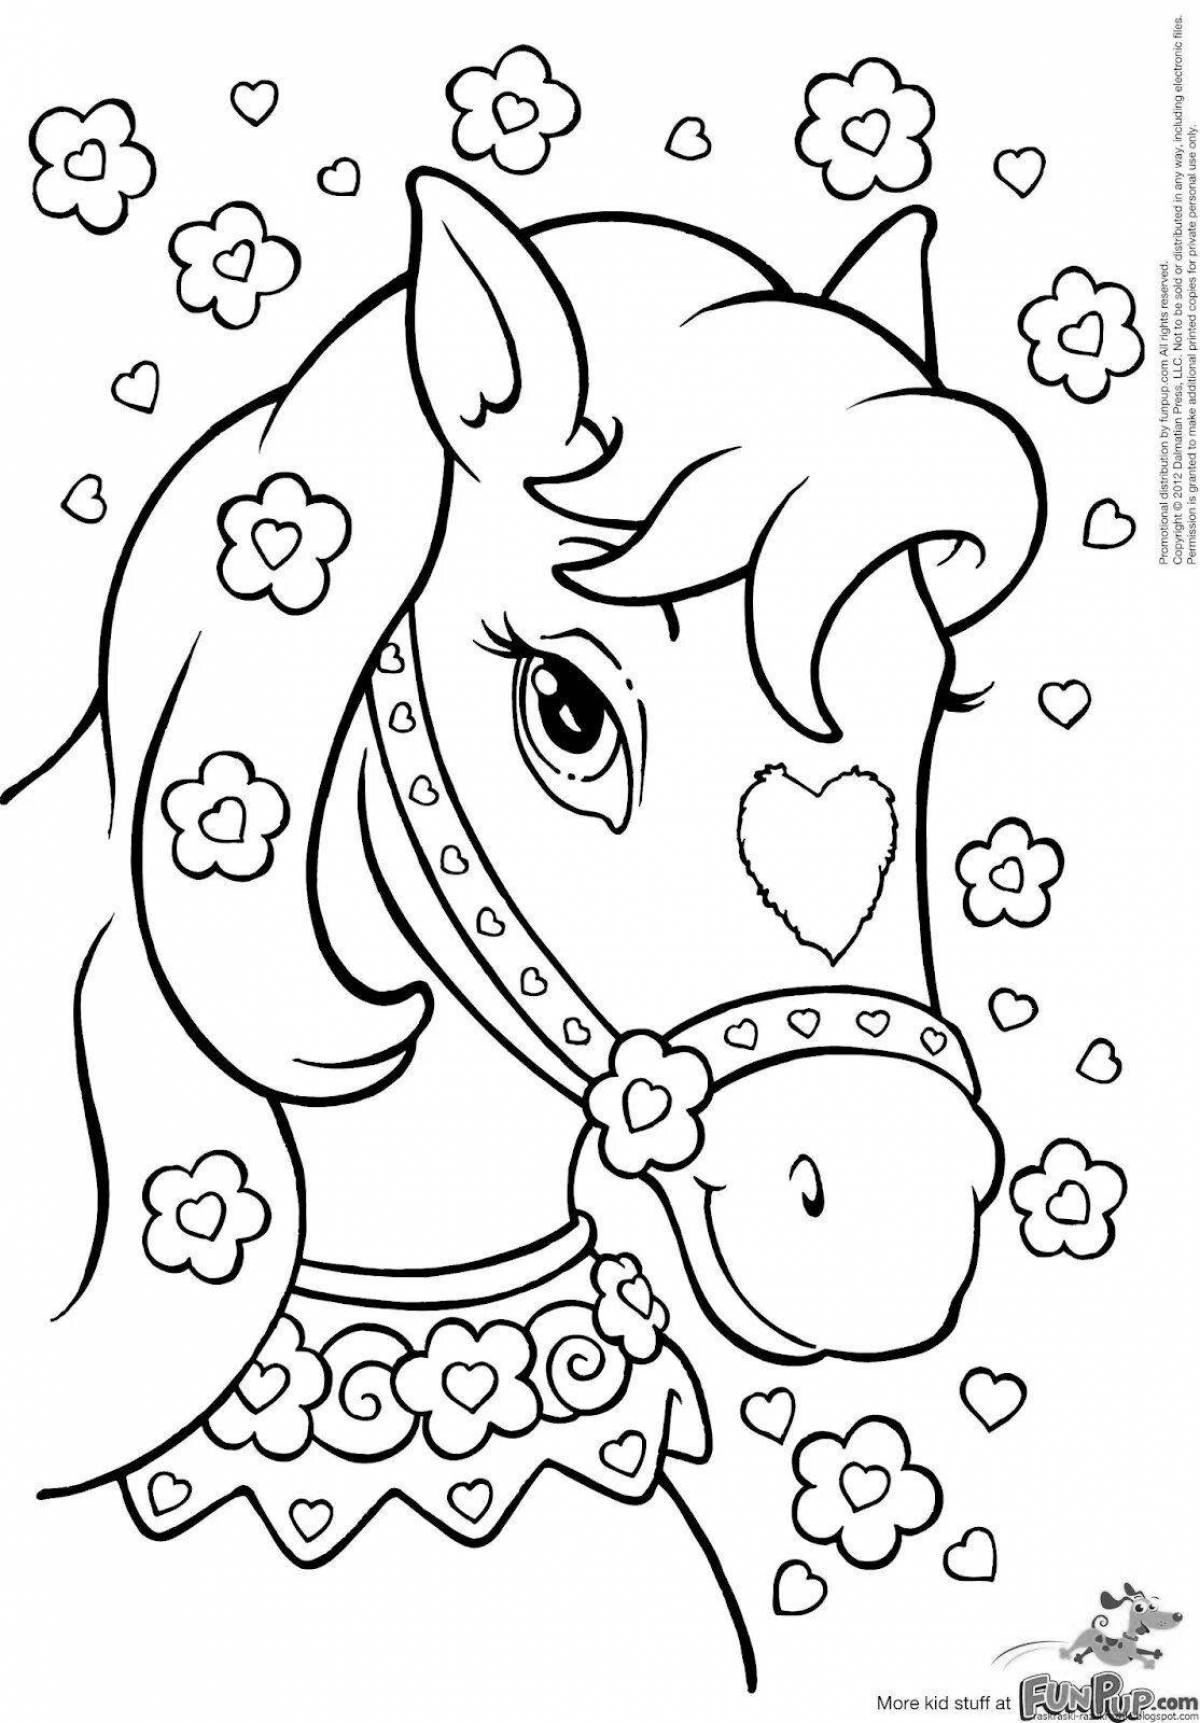 Coloring pages for girls 8